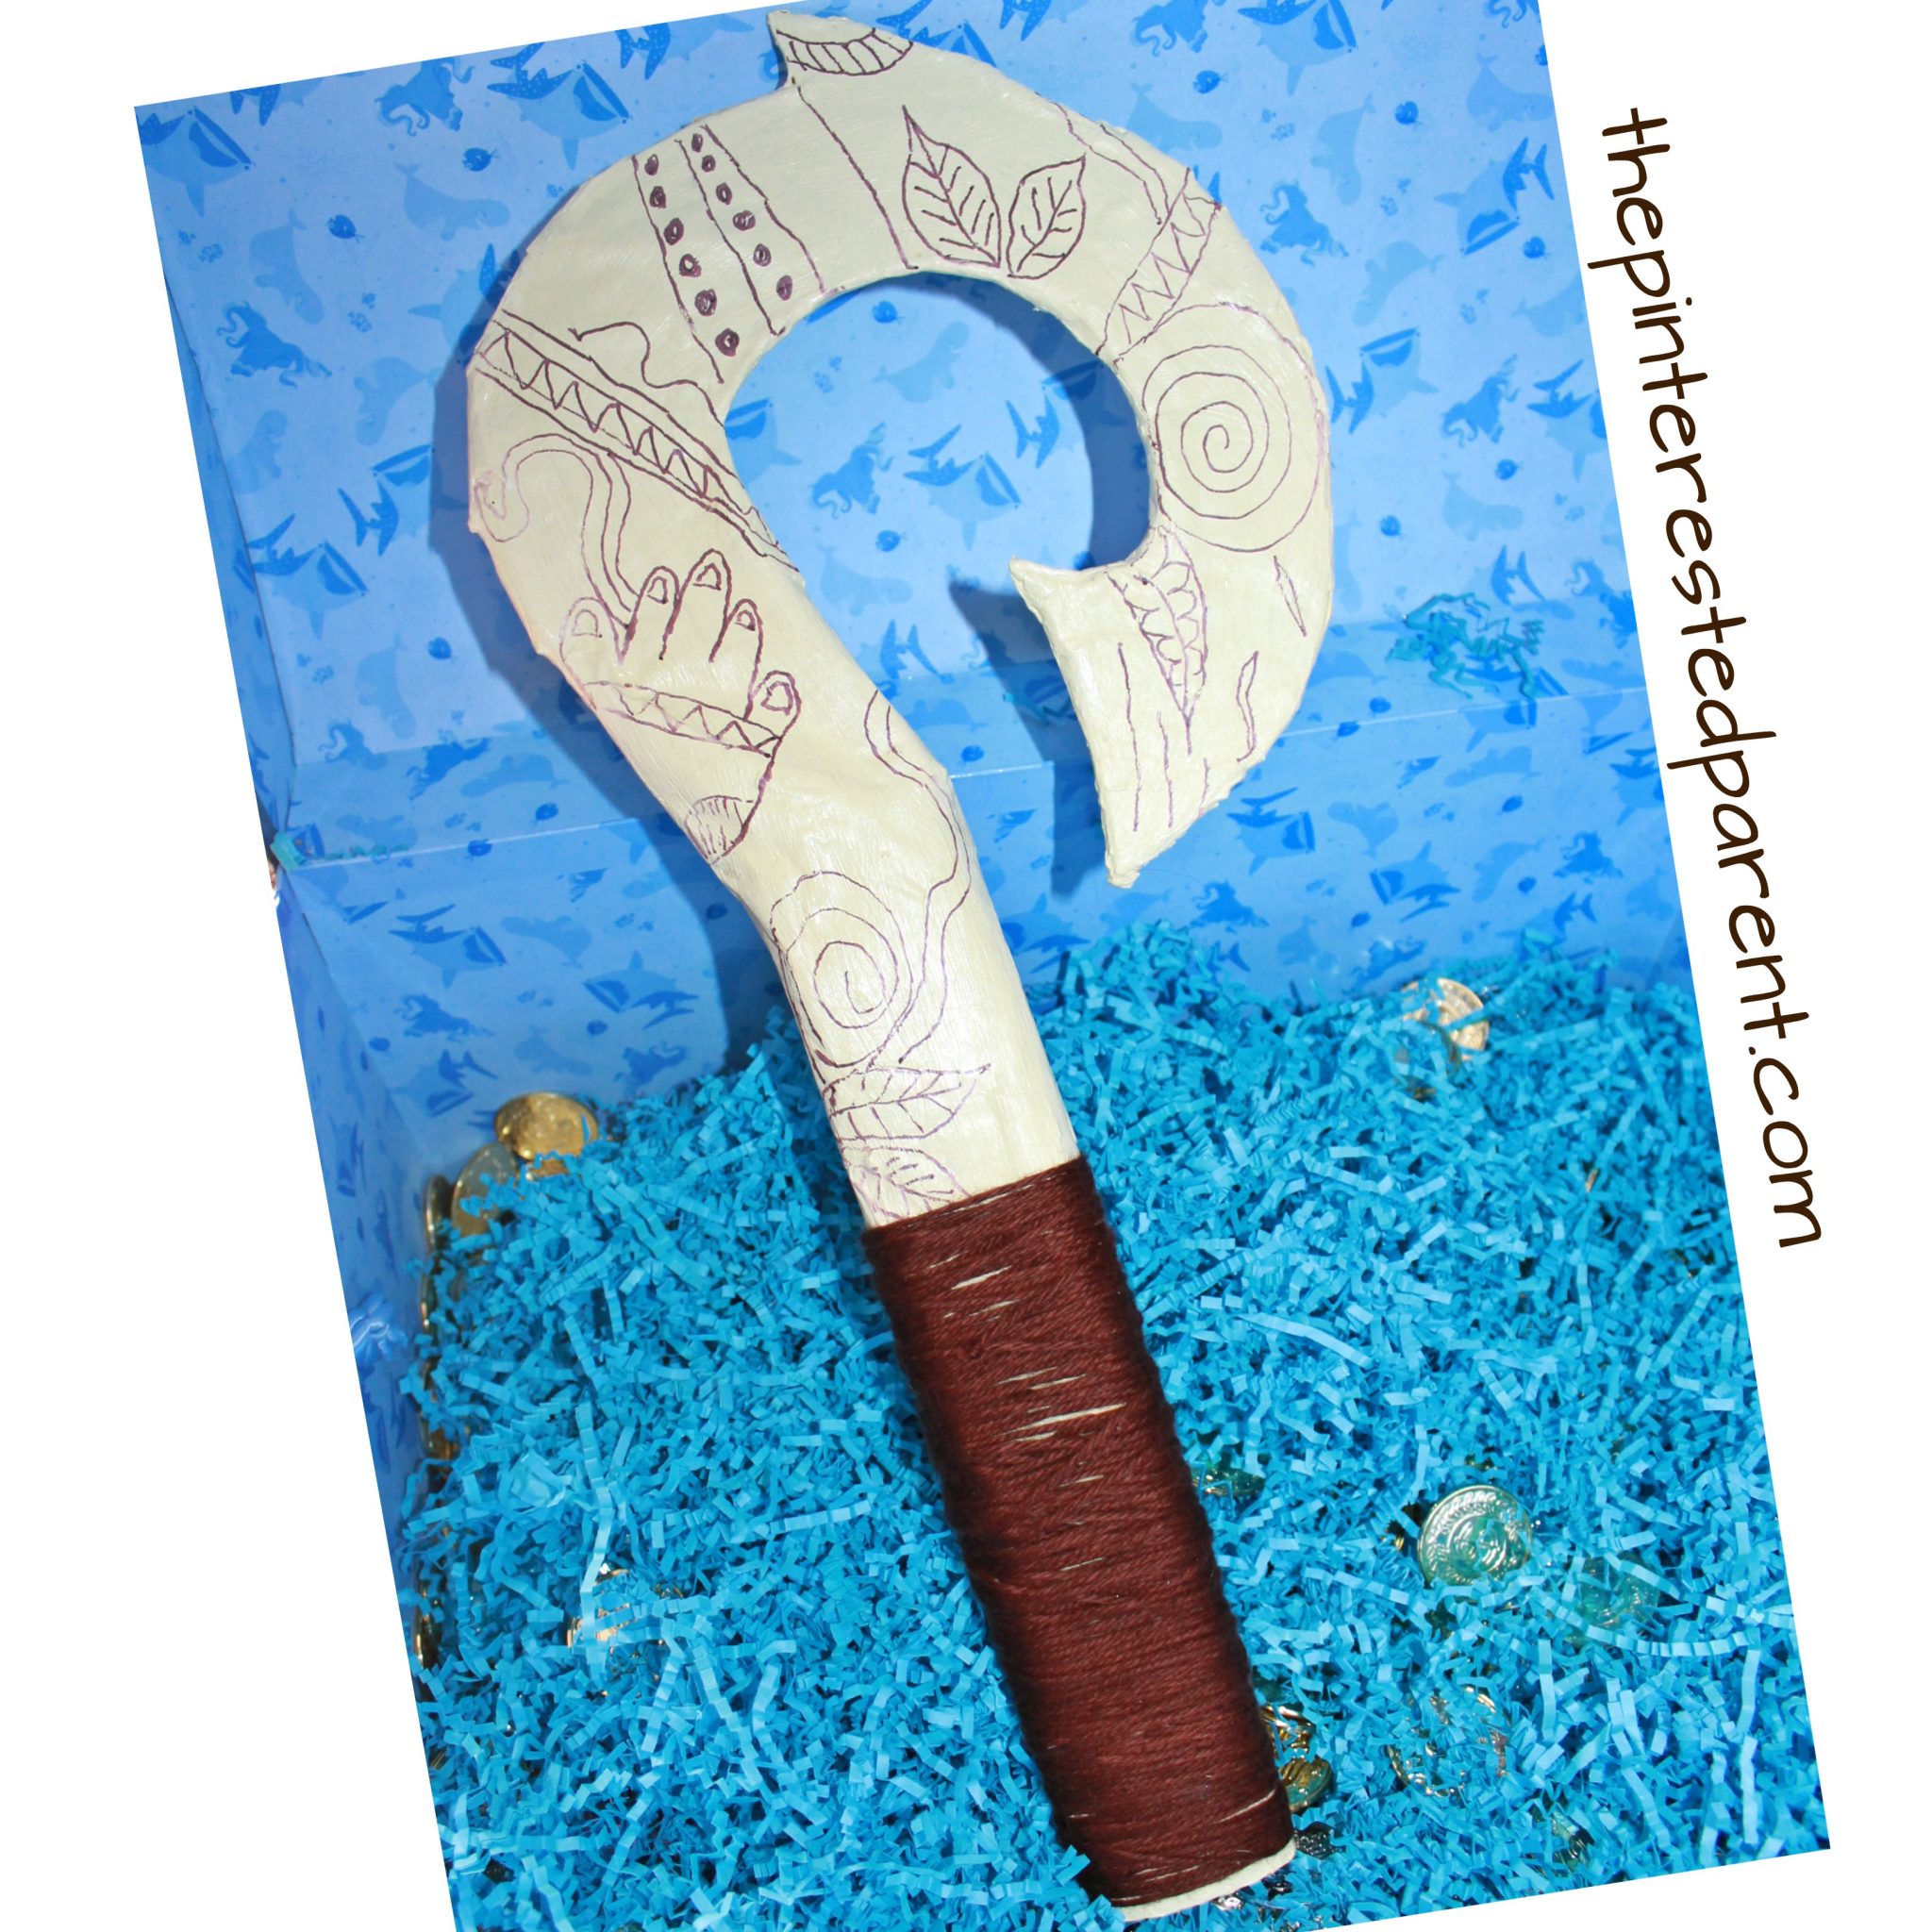 Moana inspired paper mache Maui fish hook. Use recyclables for a fun Disney inspired prop for pretend play. Kid's arts and crafts